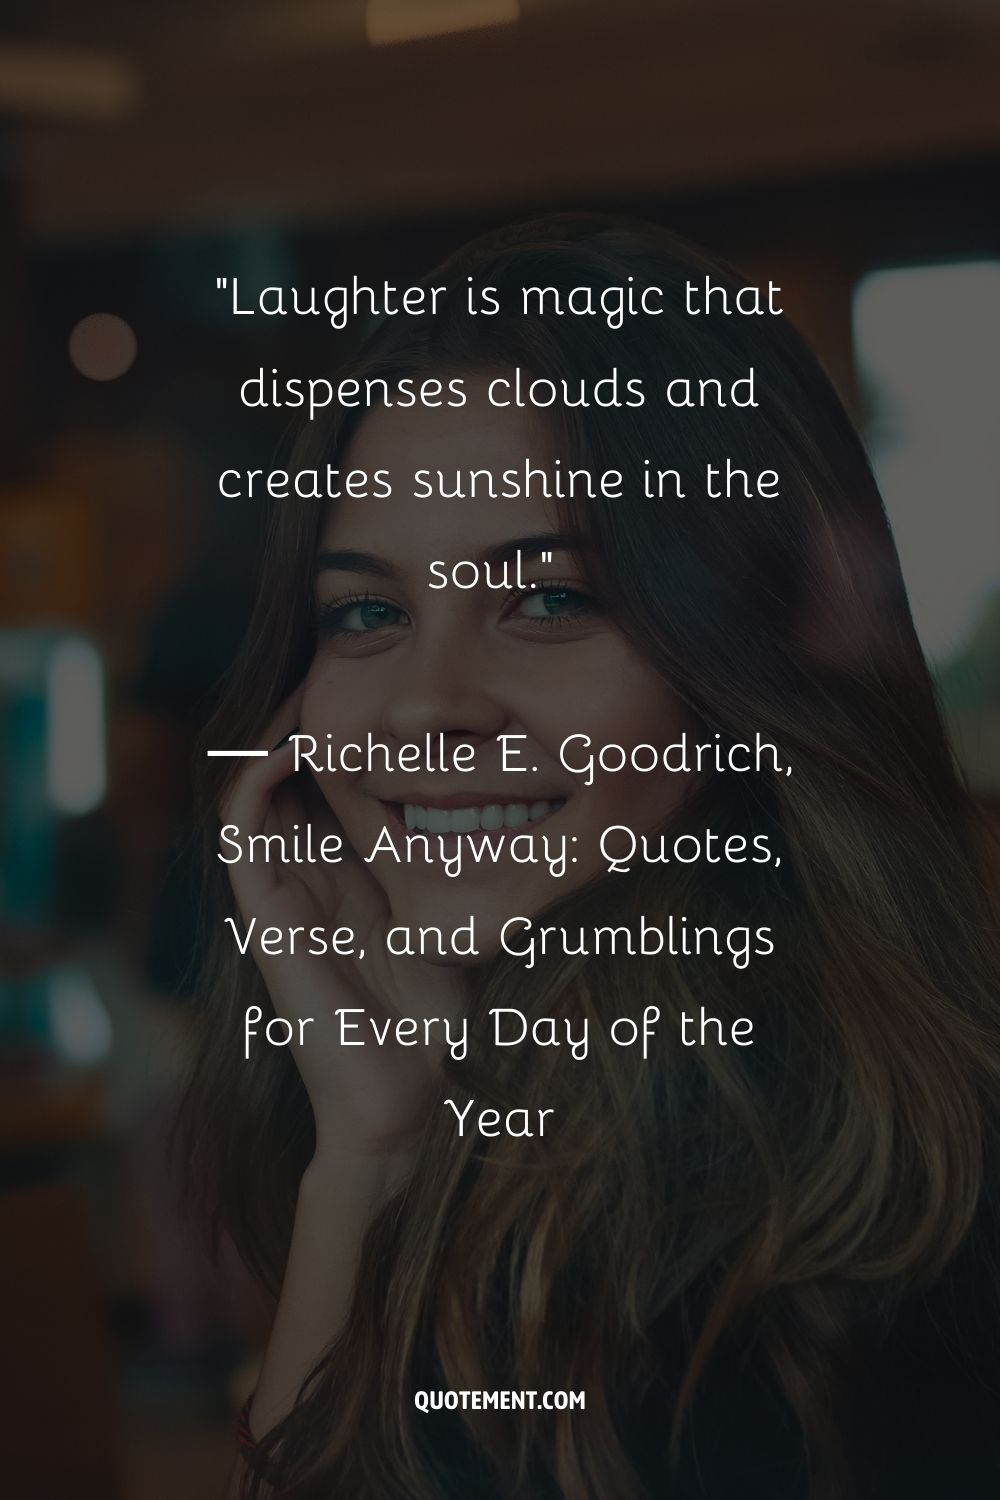 Laughter is magic that dispenses clouds and creates sunshine in the soul